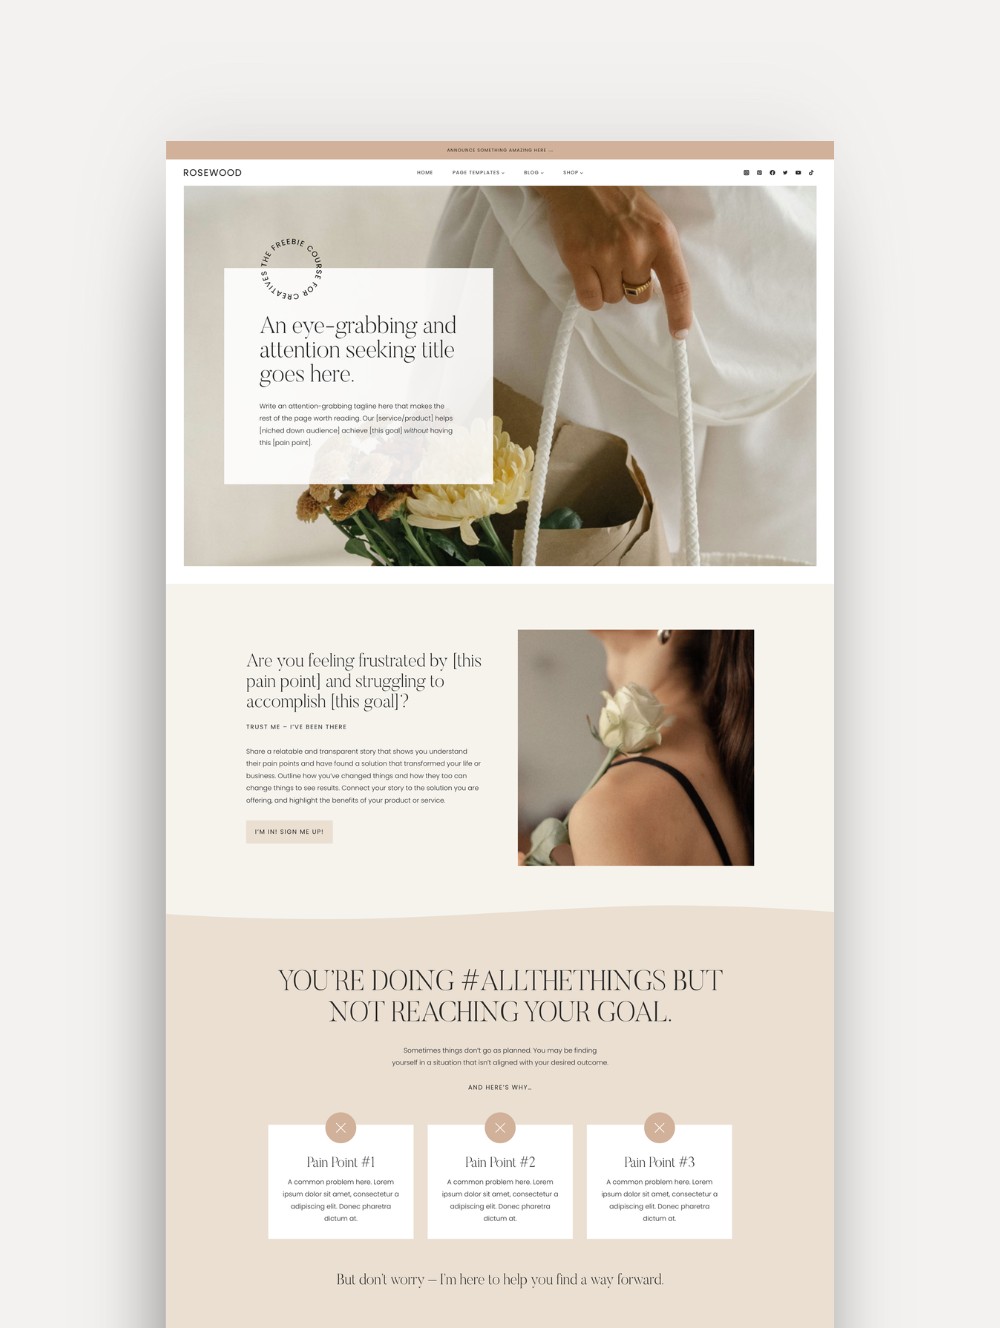 Mockup of a feminine and timeless WordPress theme Sales Page designed on the Kadence theme, showcasing elegant and clean design elements